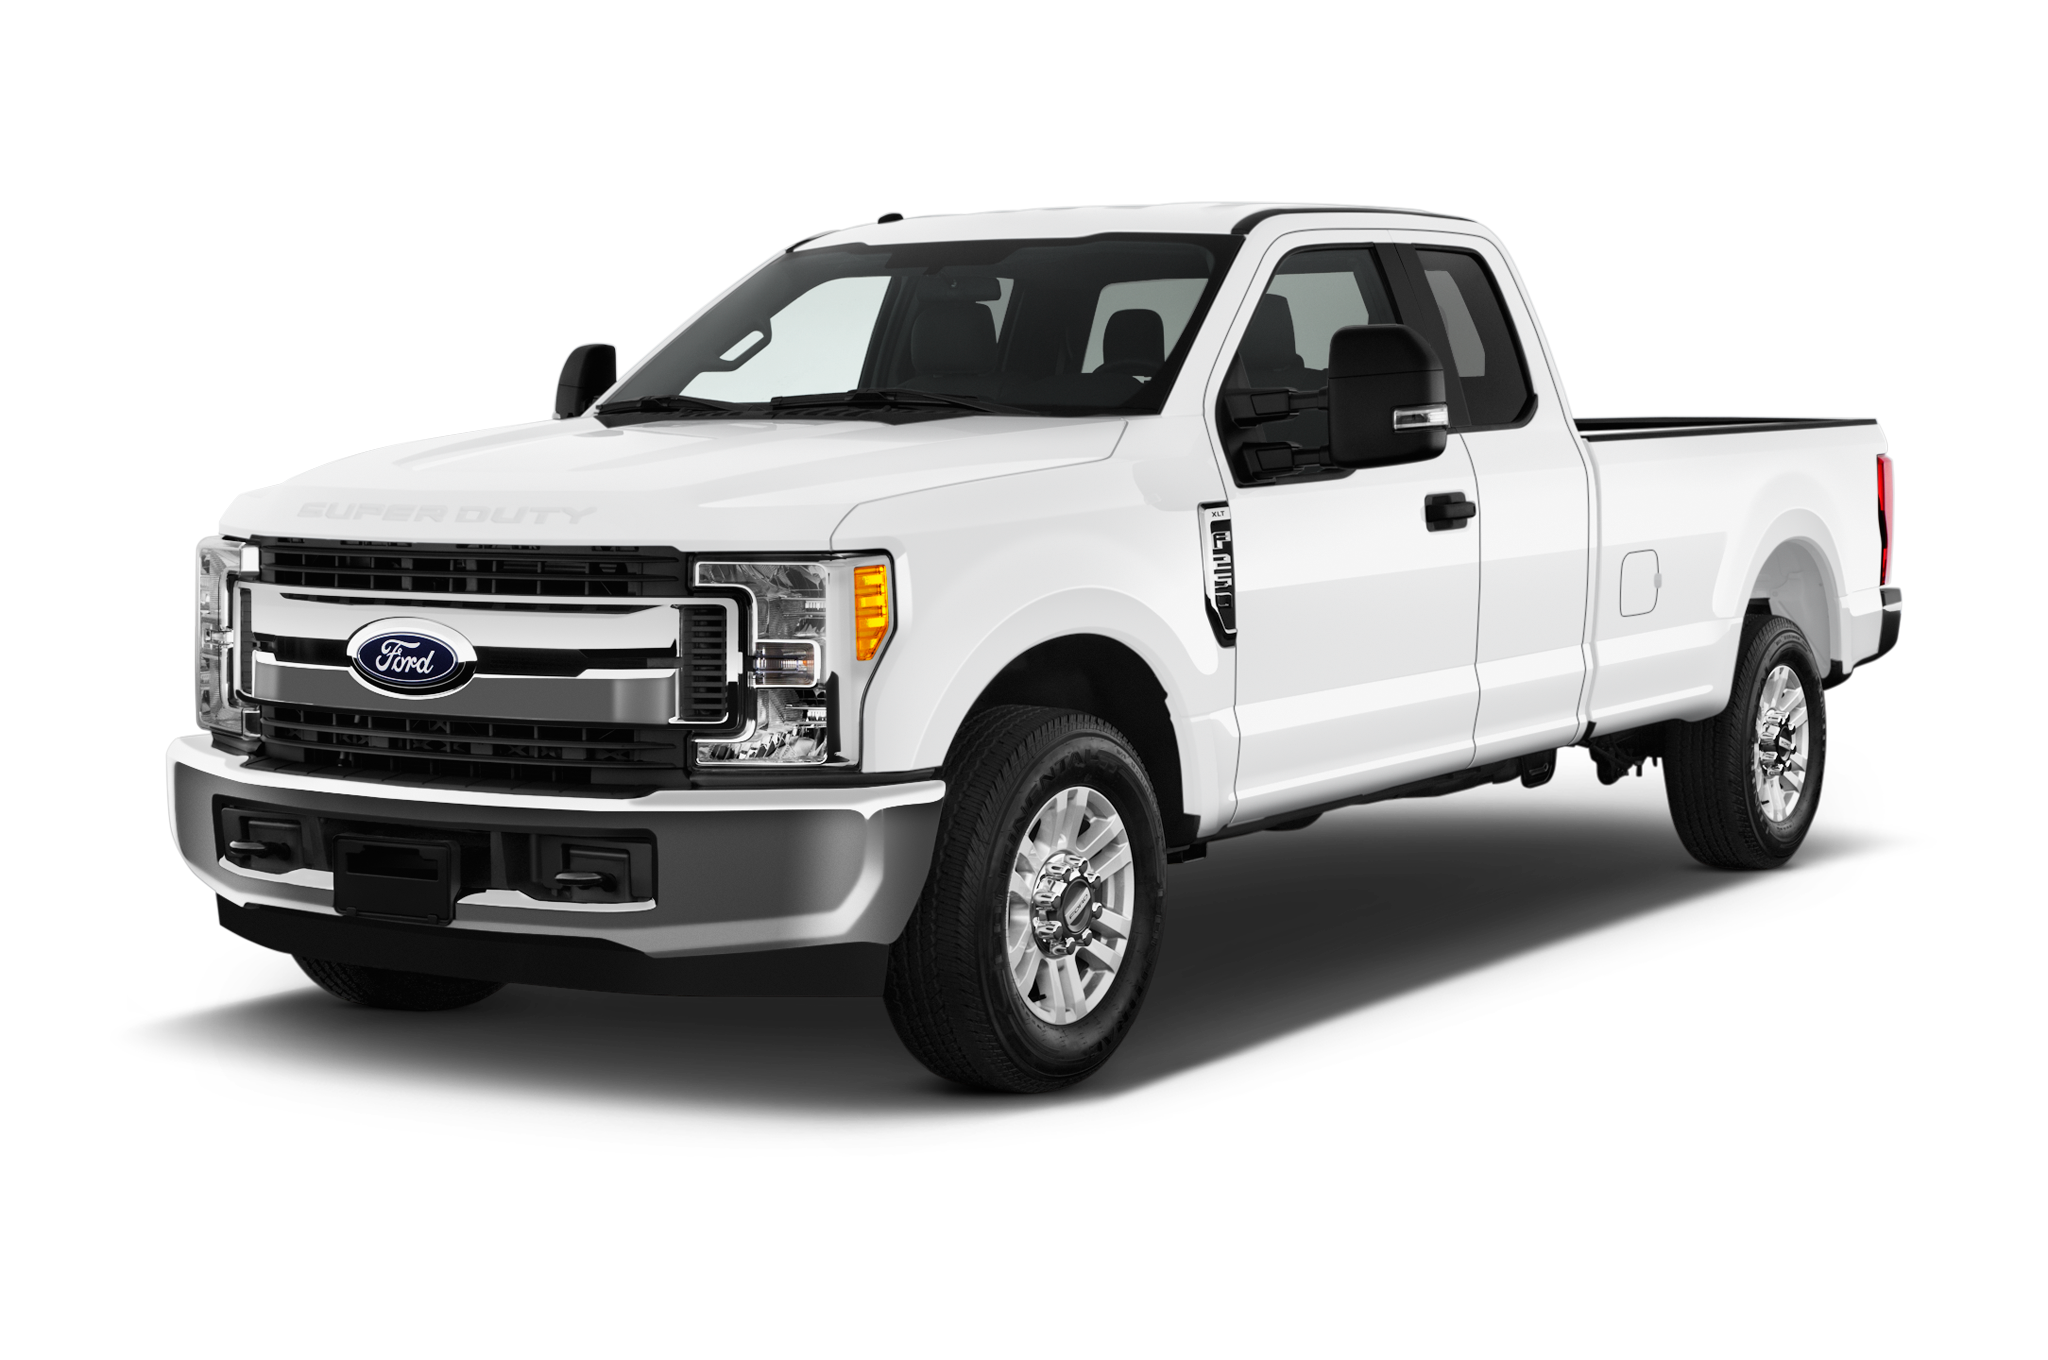 2017 Ford F-250 Super Duty Overview - MSN Autos